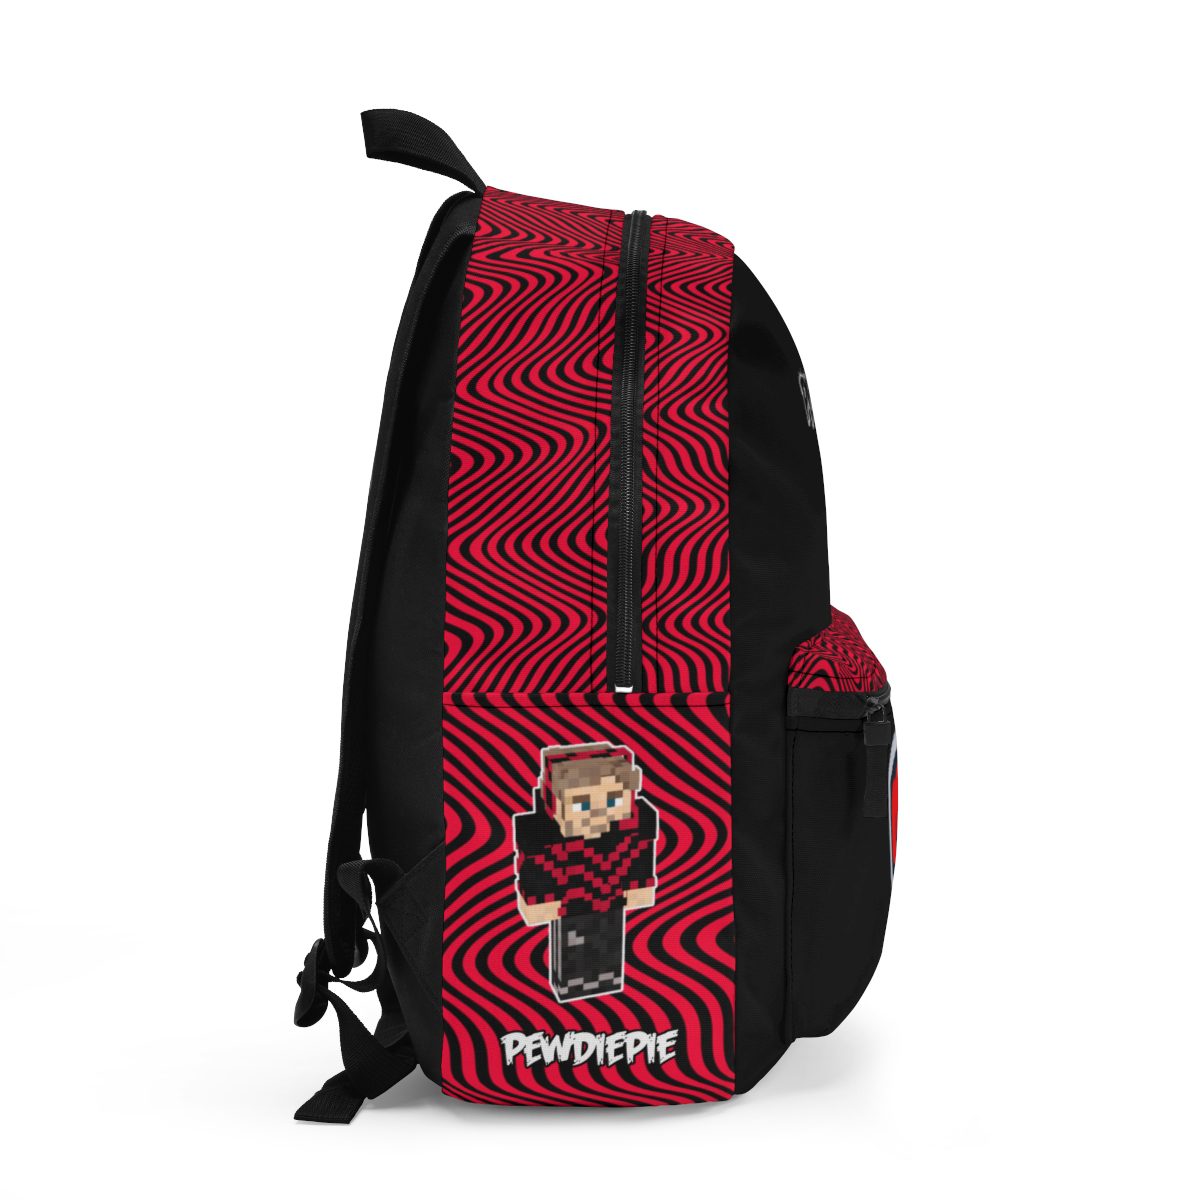 Minecraft Pewdiepie Logo and Symbol Black and Red Backpack Cool Kiddo 12